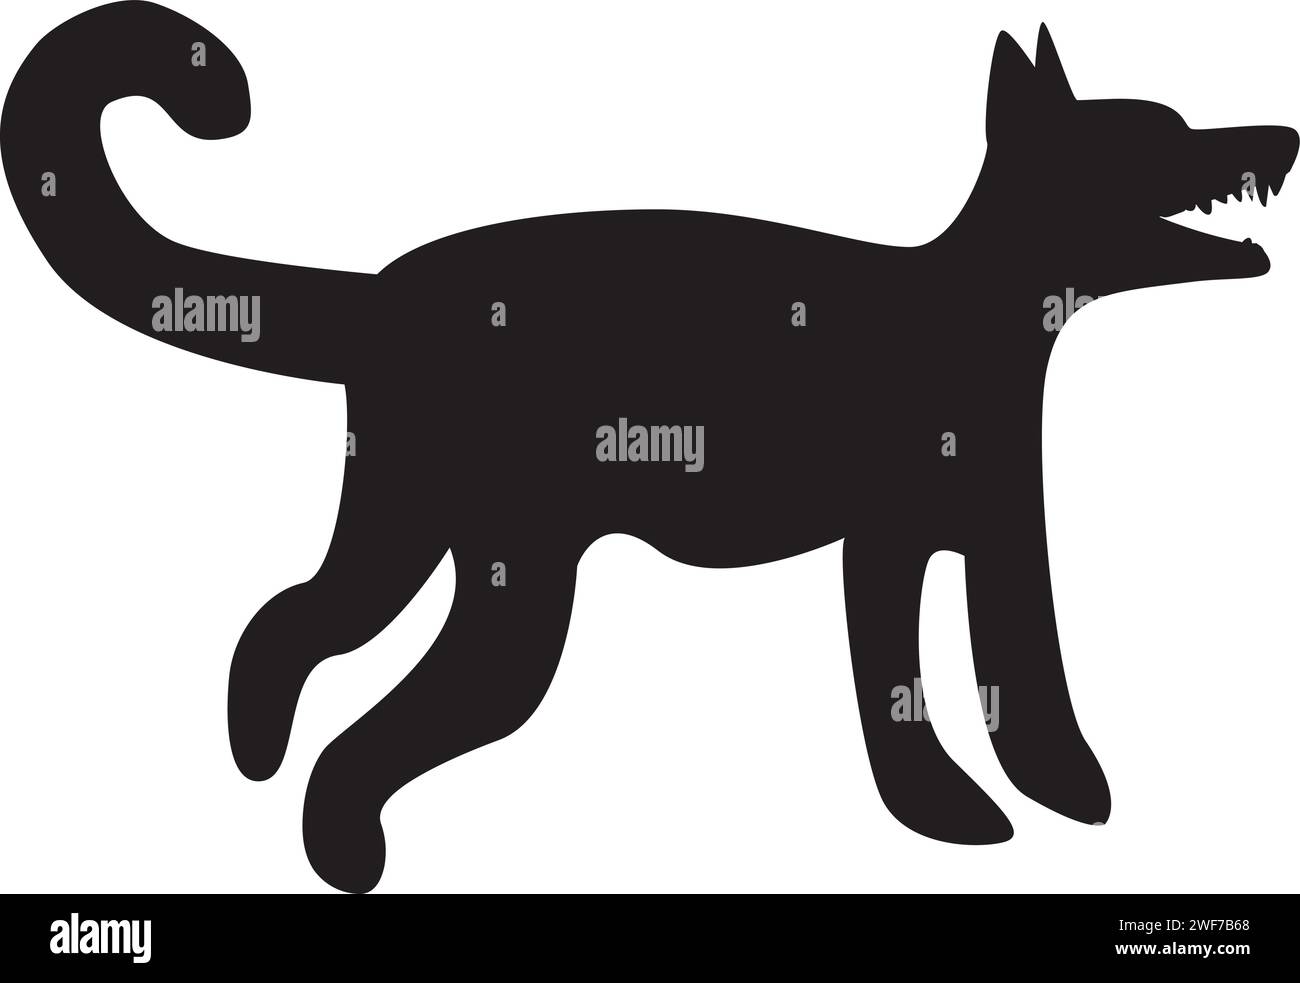 Black silhouette angry dog animal body, fairy tale Halloween character. Creepy shadow outline of nocturnal angry dog scarecrow. Simple black and white Stock Vector